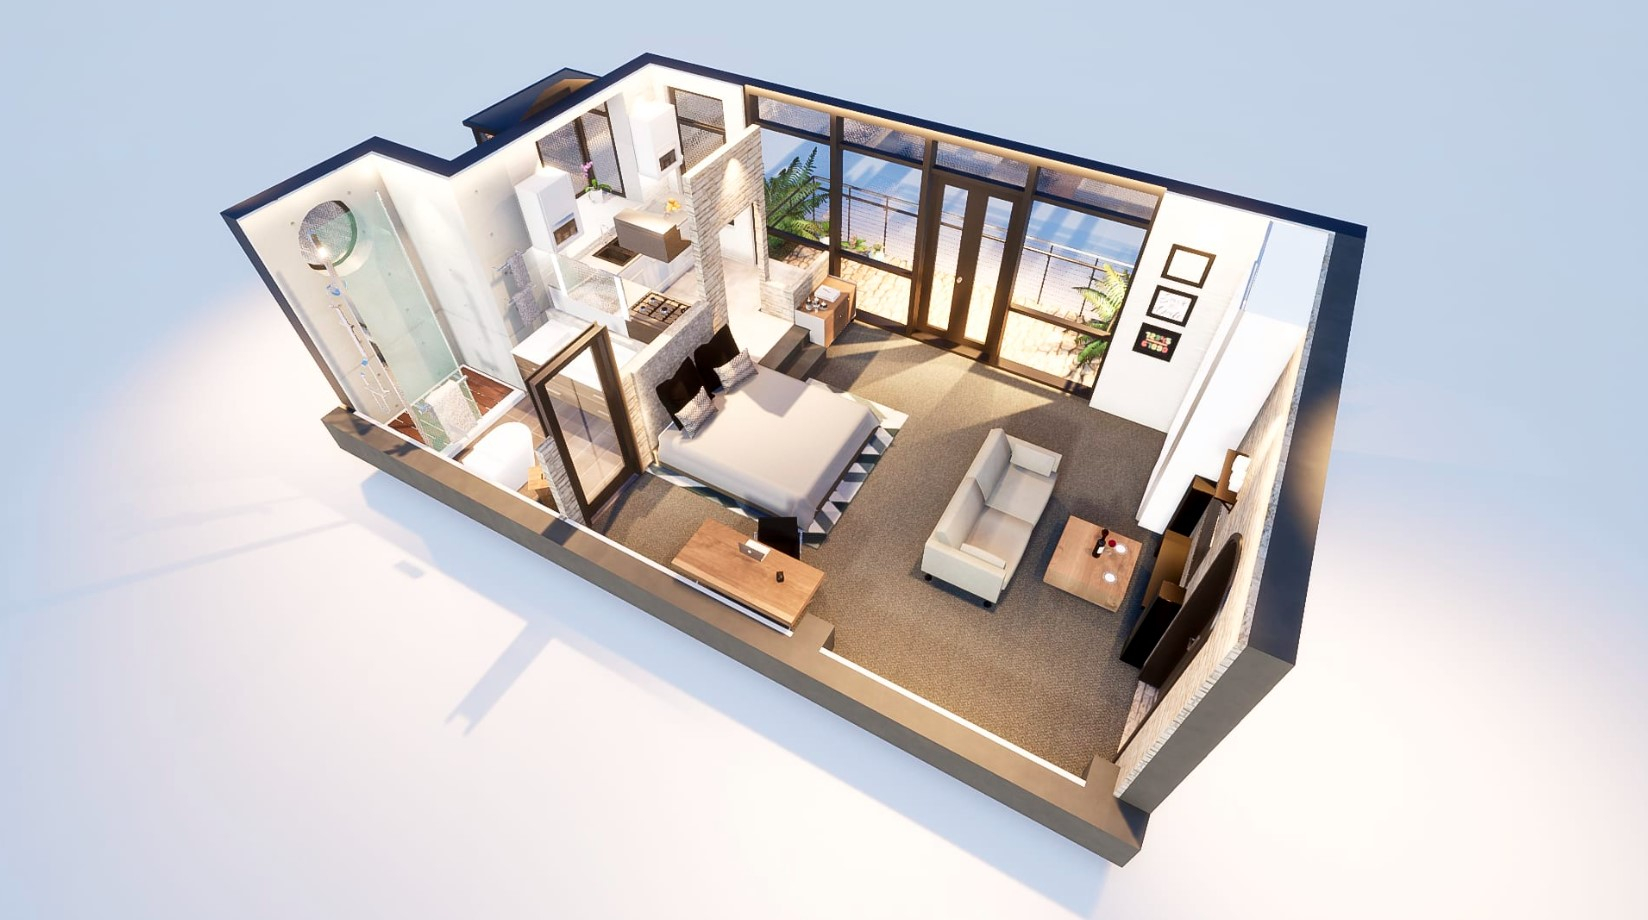 I will create 3d floor plans, interiors and exteriors and products